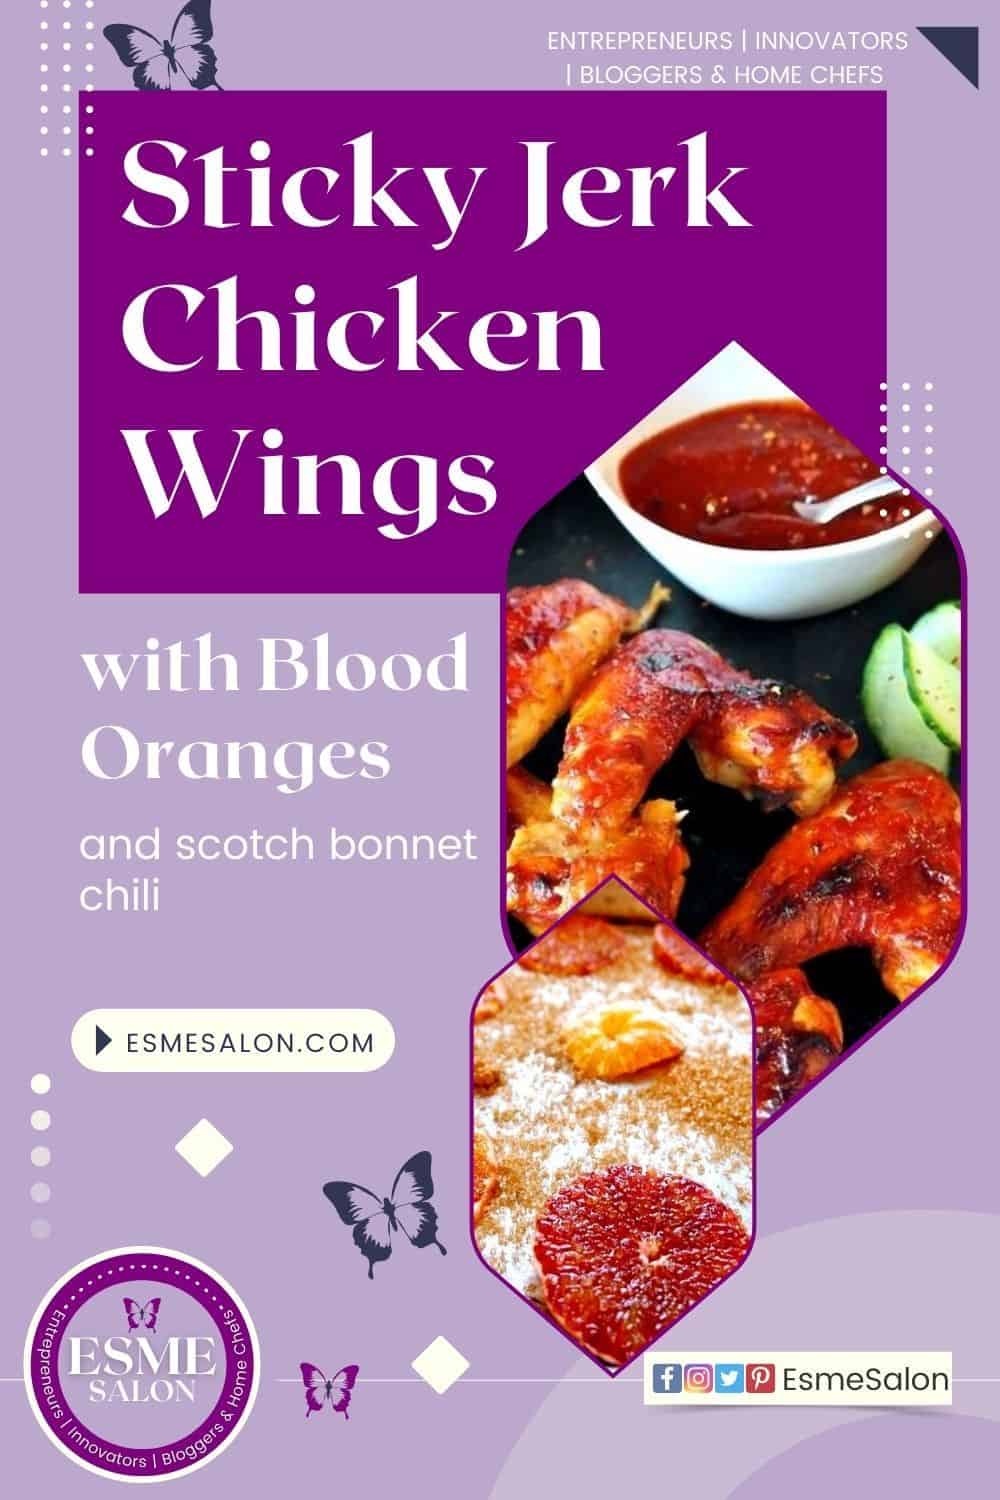 Sticky Jerk Chicken Wings with Blood Oranges